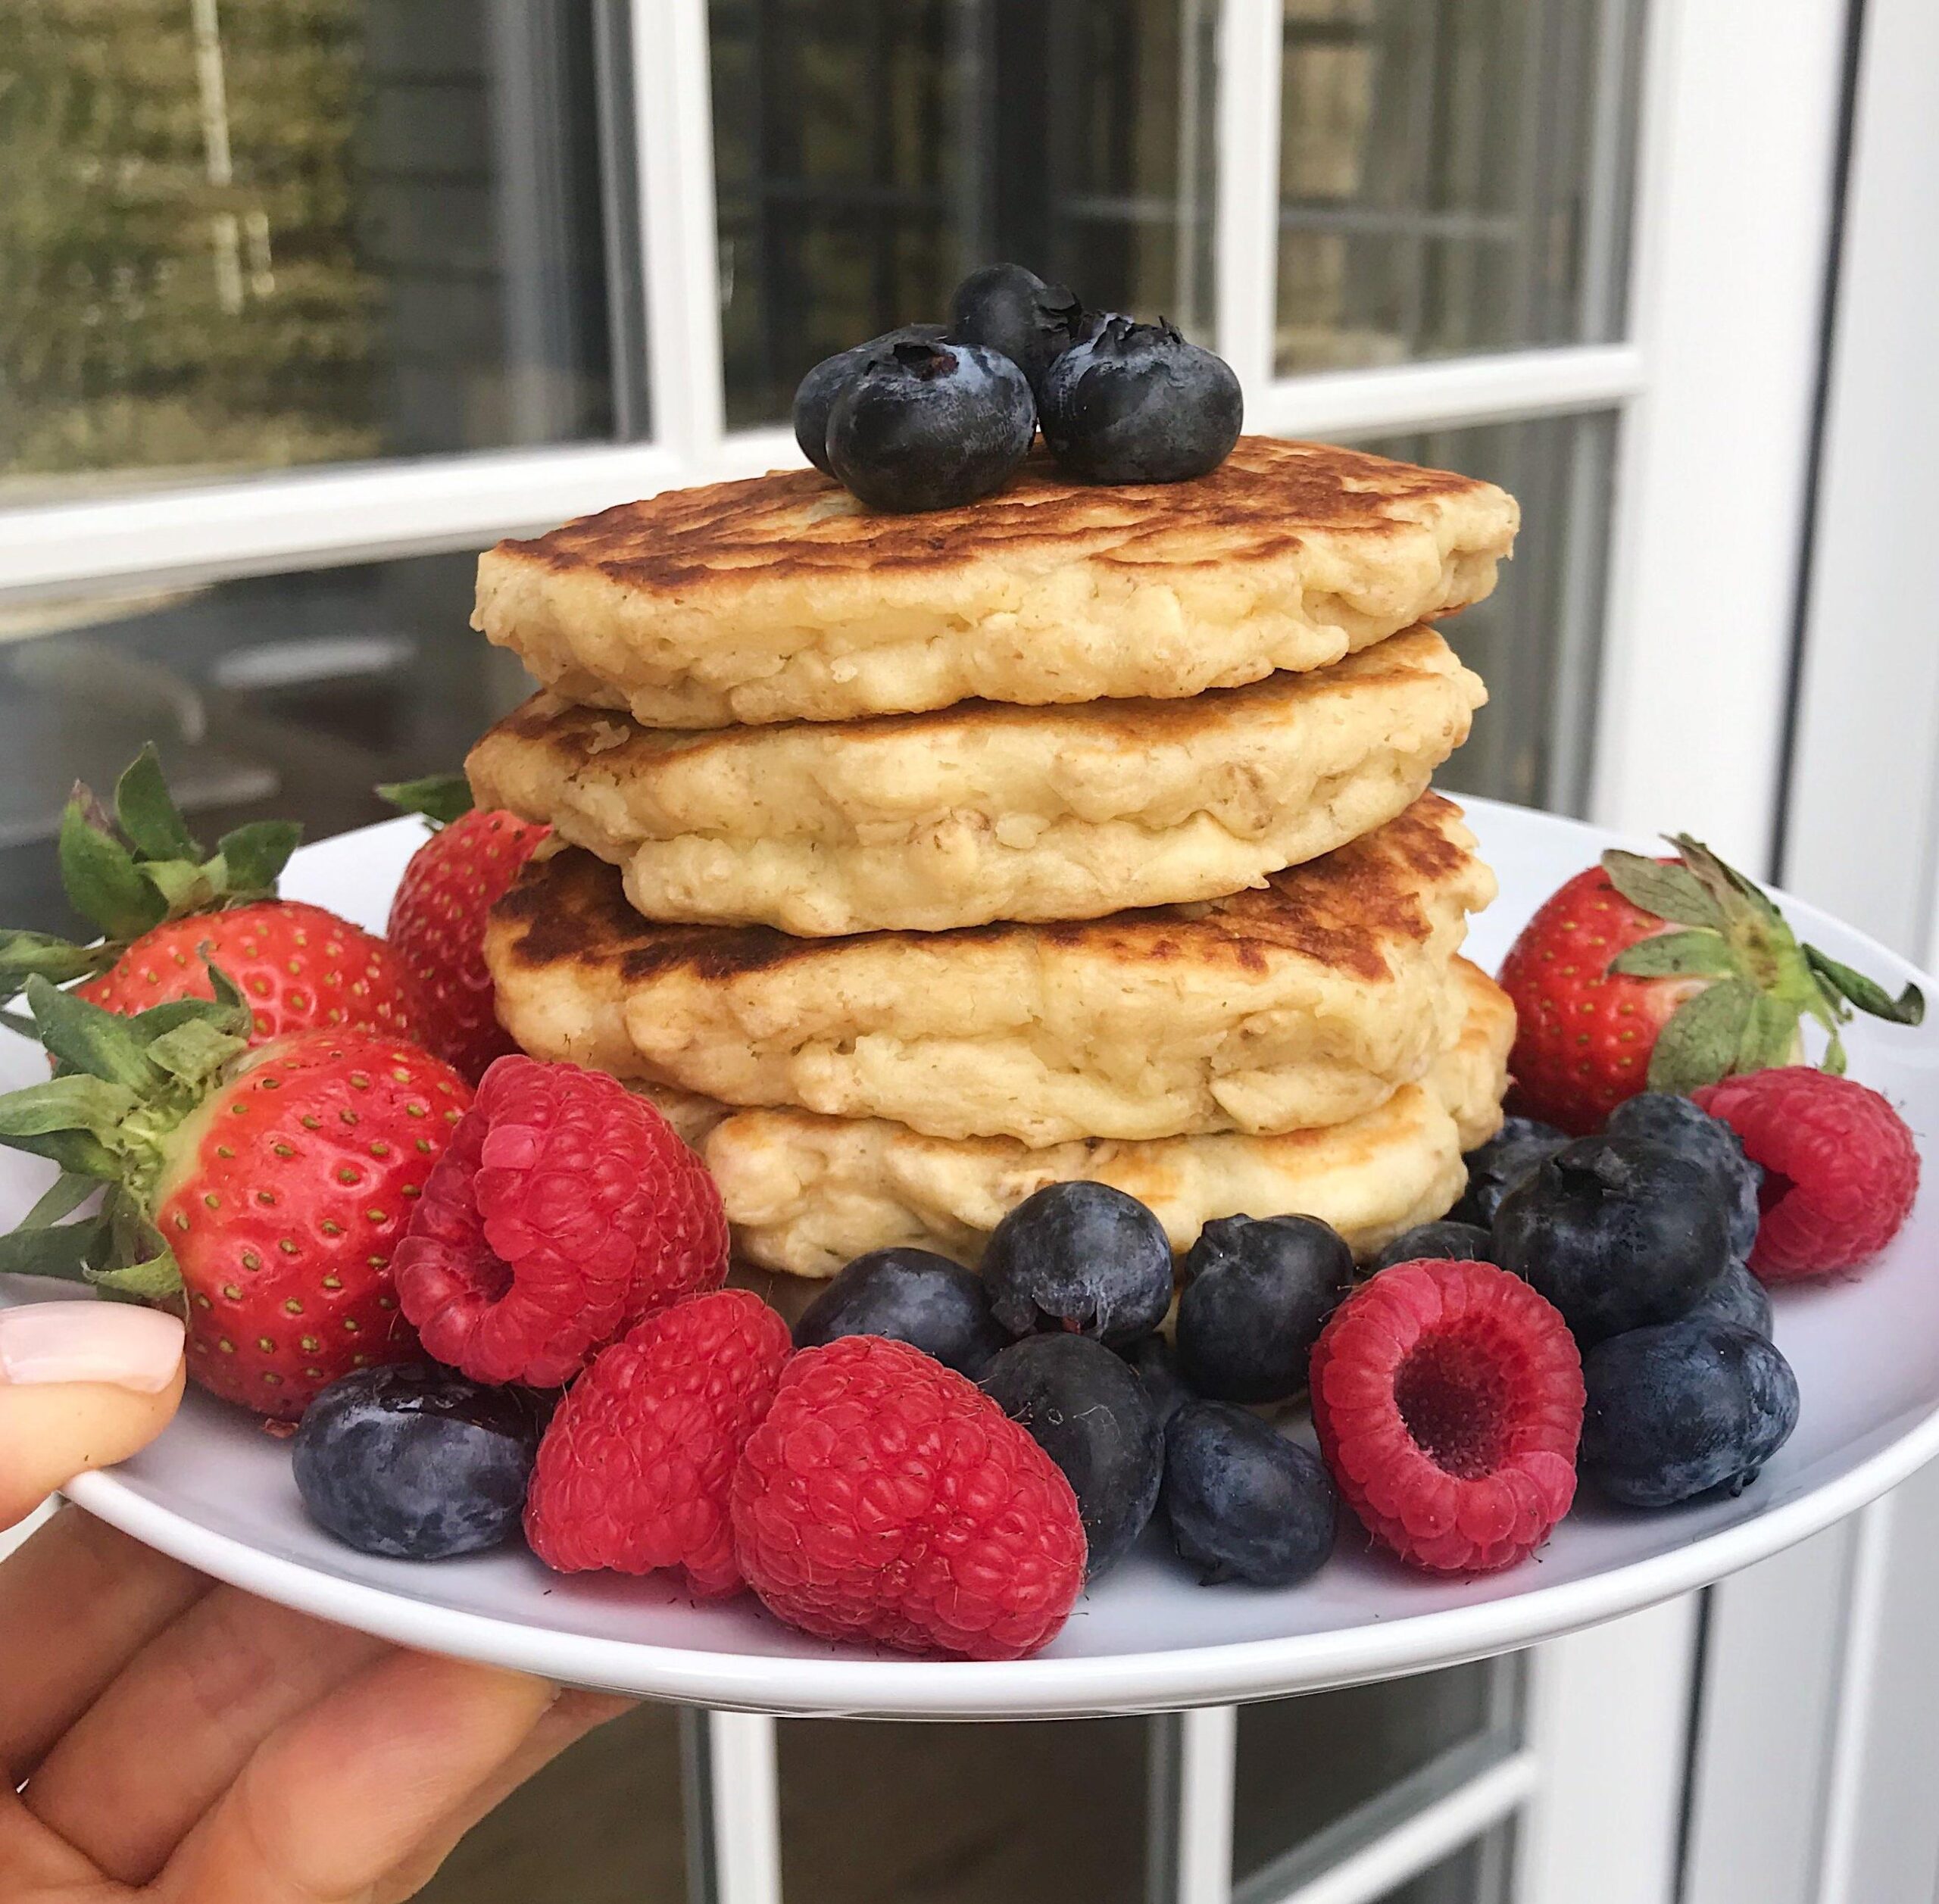  Don't skip breakfast! Try these gluten-free Rolled Oats Pancakes and fuel your day